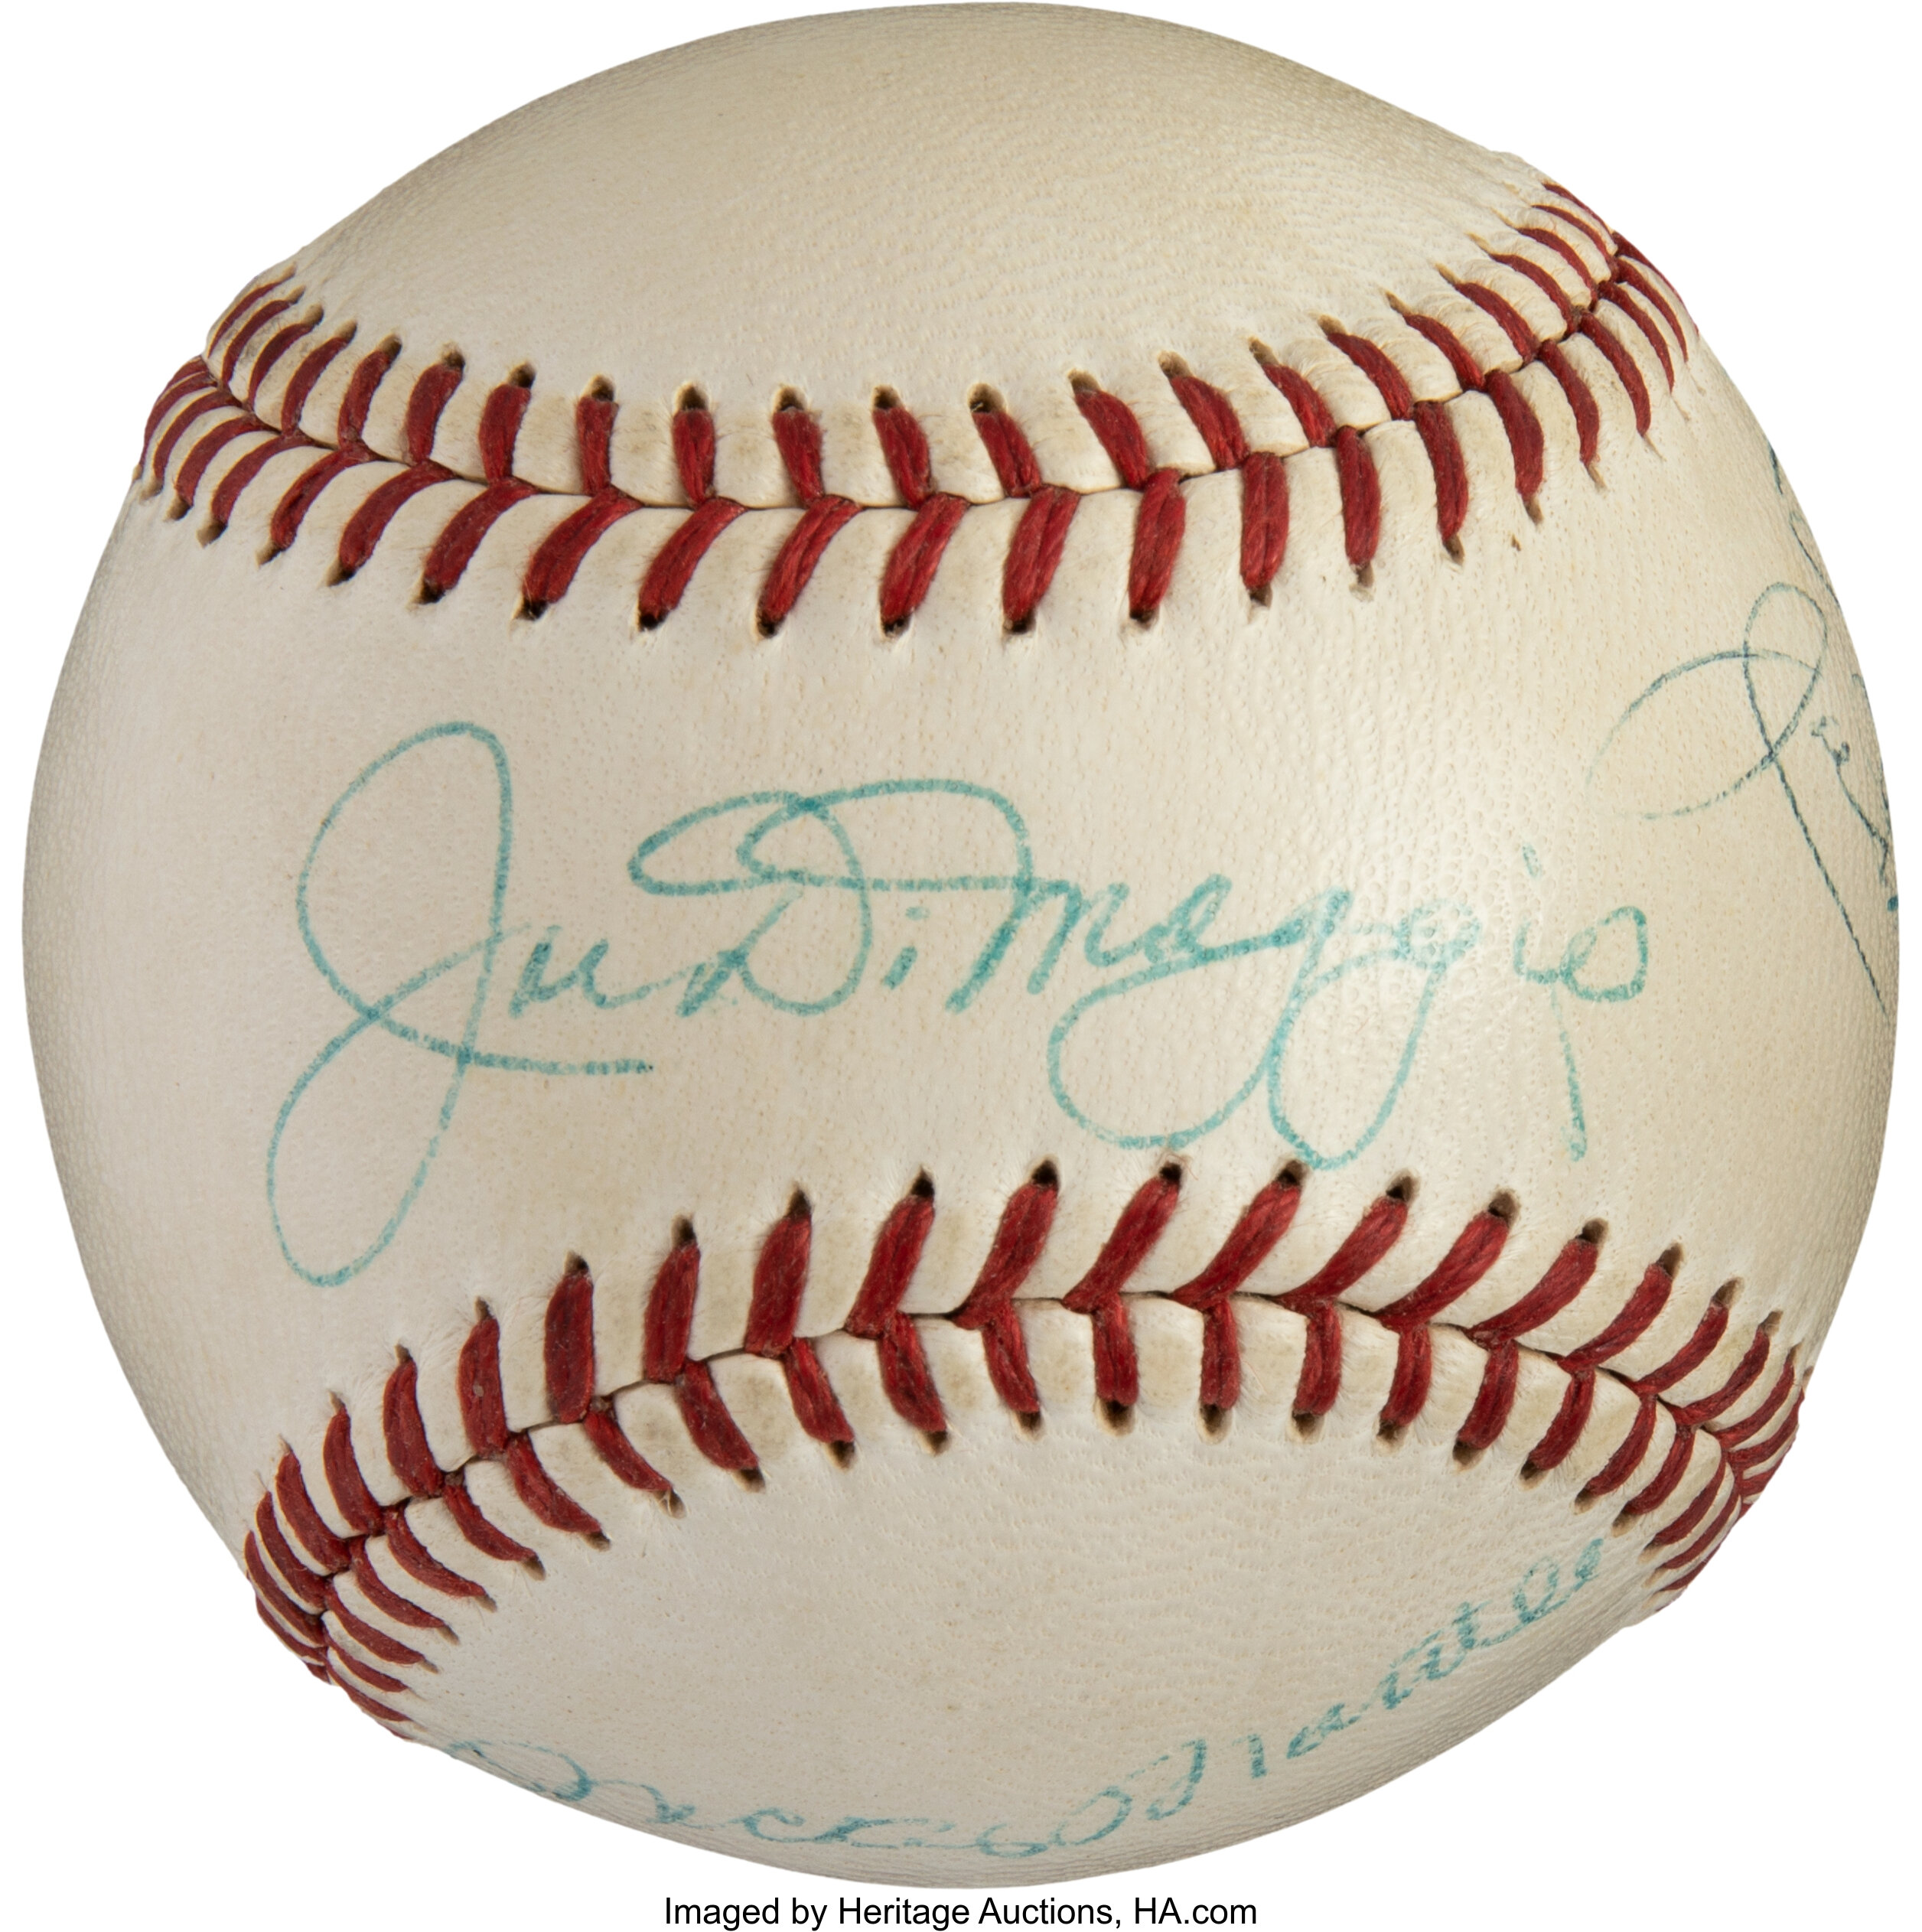 Mickey Mantle Autographed Baseball Inscribed The Commerce Comet